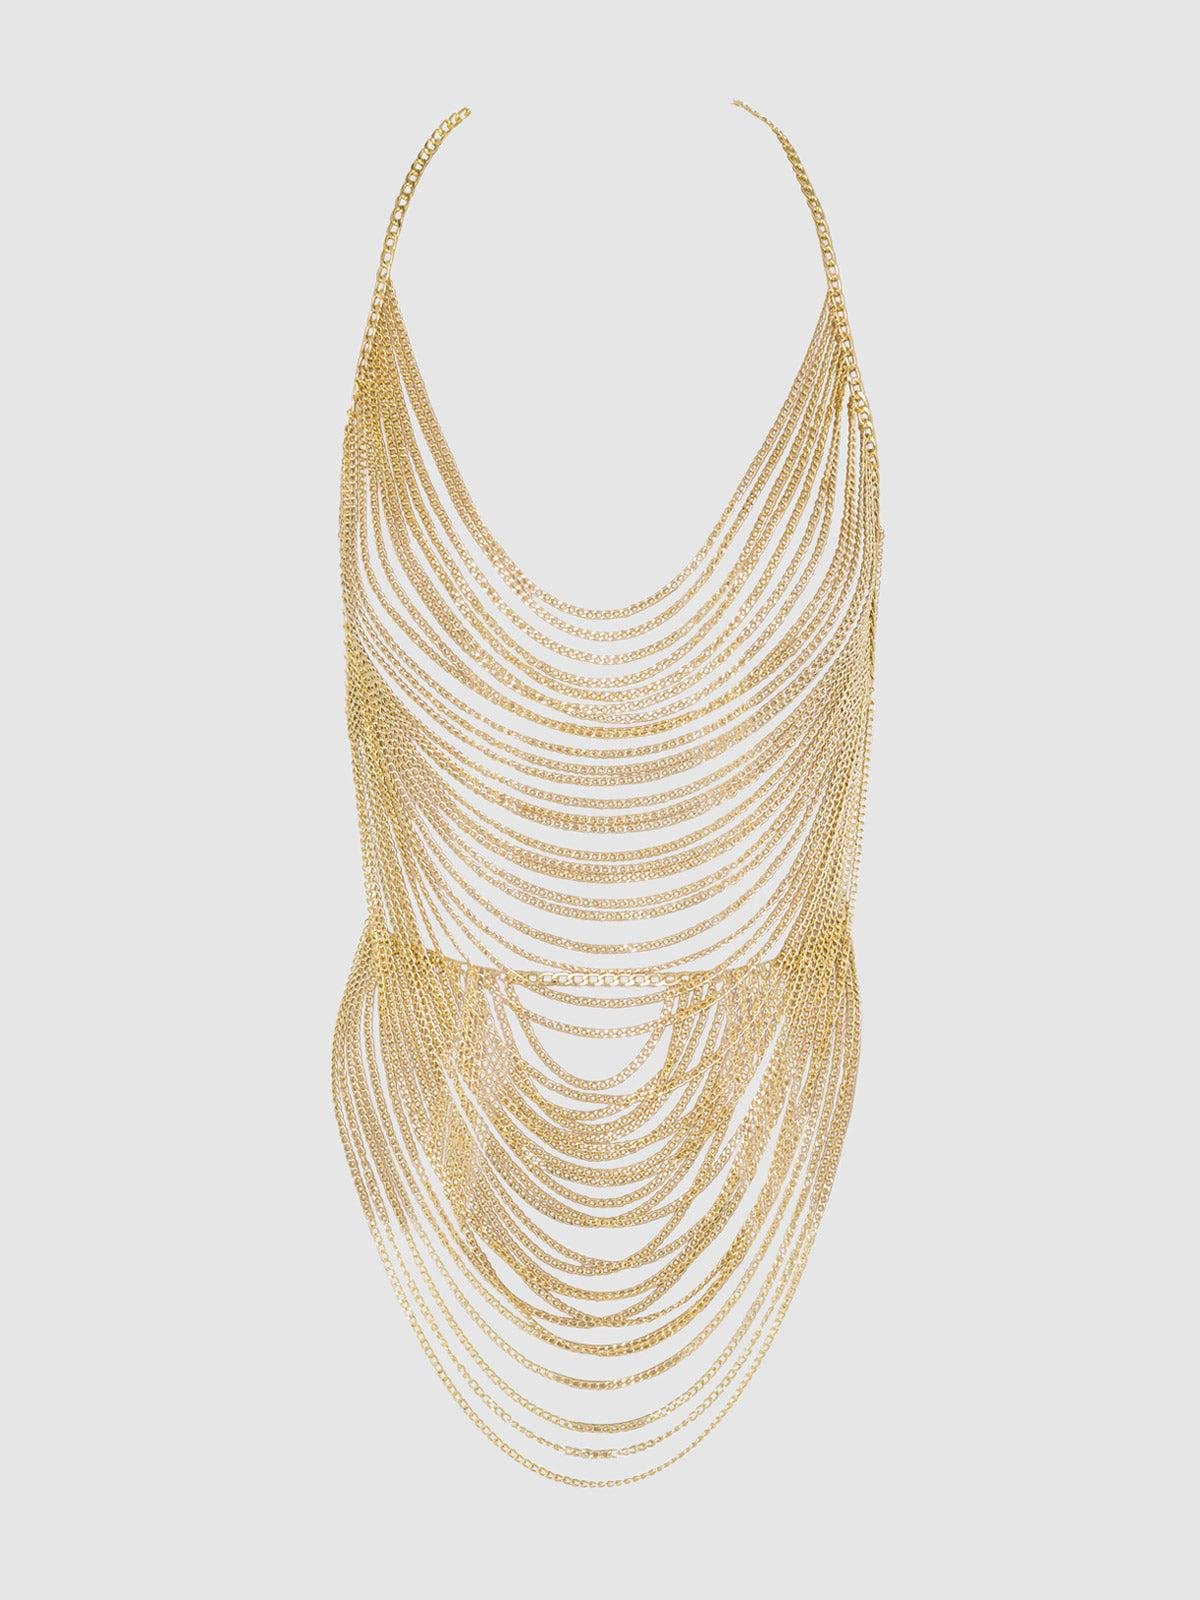 ZIGGY CHAIN CHEMISE DRESS Lingerie in Gold by FREDERICK'S OF HOLLYWOOD